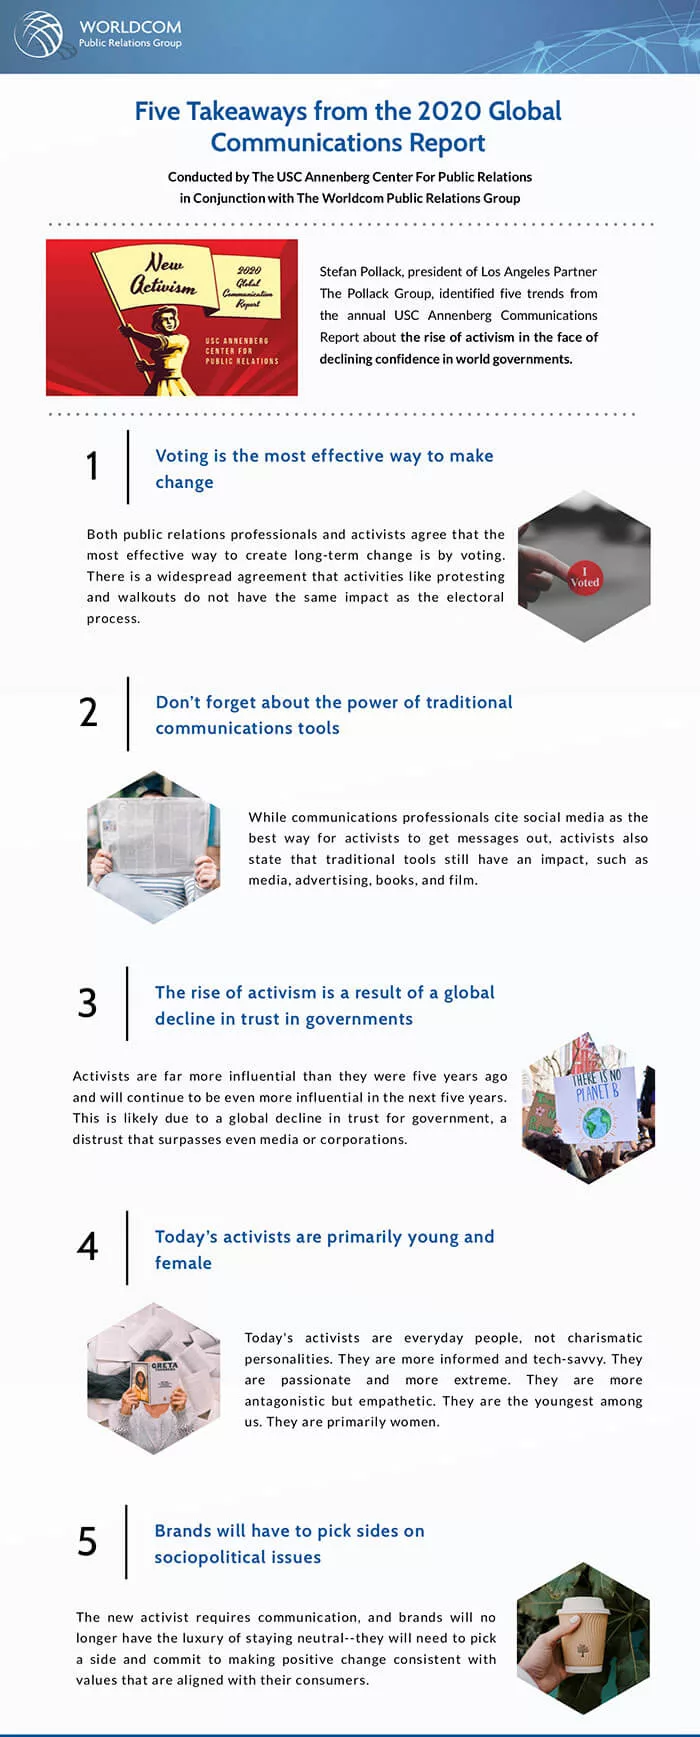 Infographic summarizing 2020 Global Communications Report on activism trends.